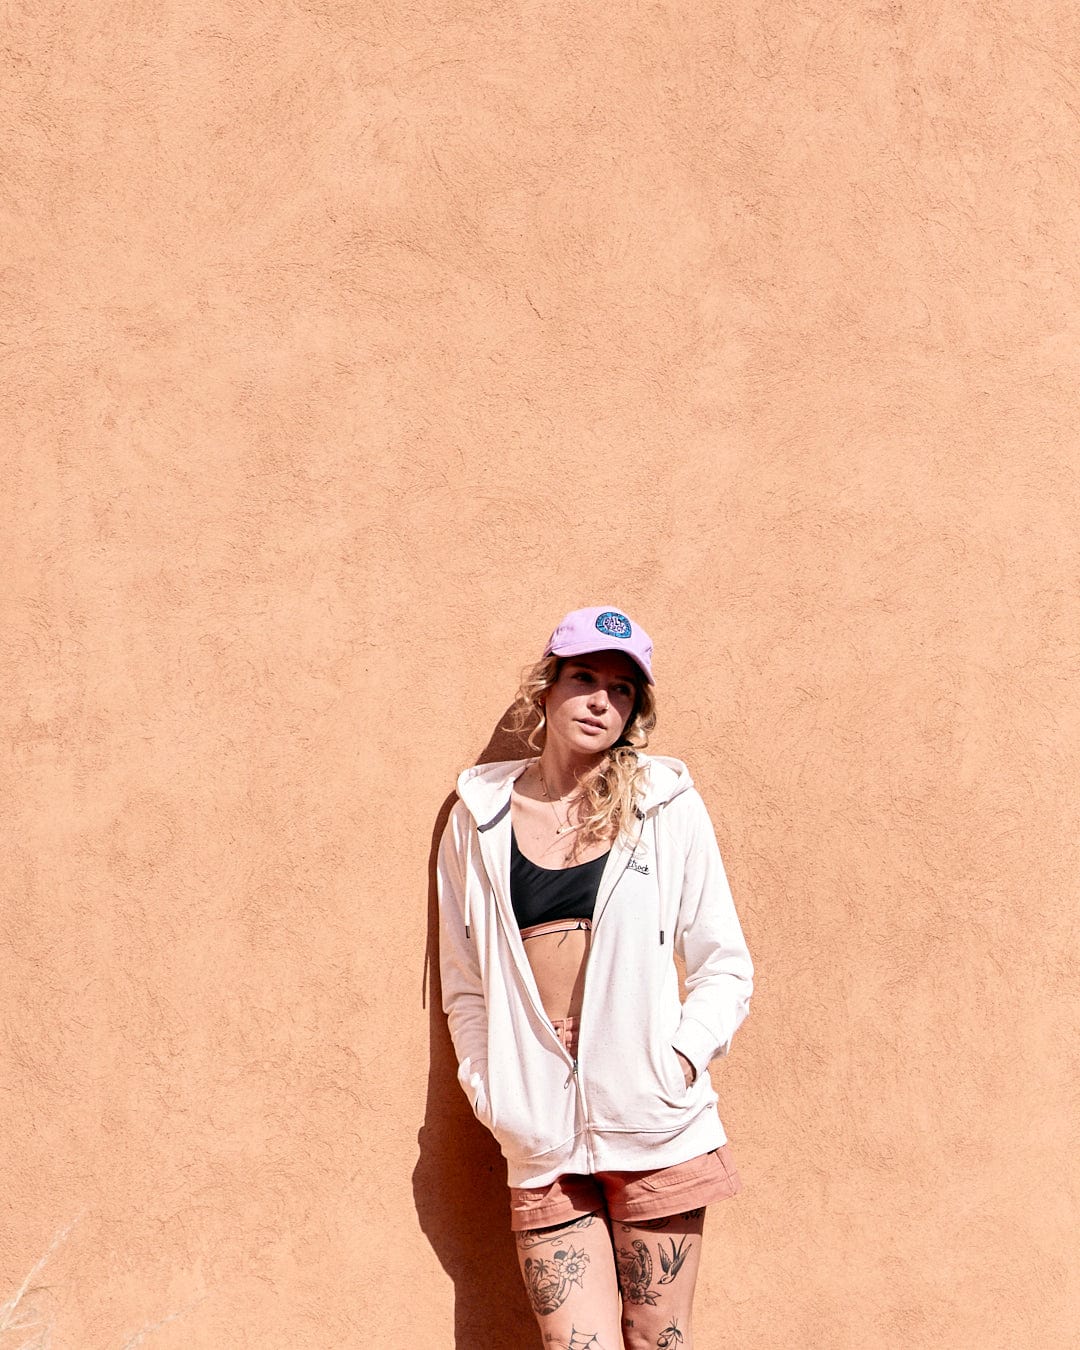 A woman in a Ginny - Womens Zip Hoodie - Cream from Saltrock, standing against an orange wall, looking to the side with a relaxed pose.